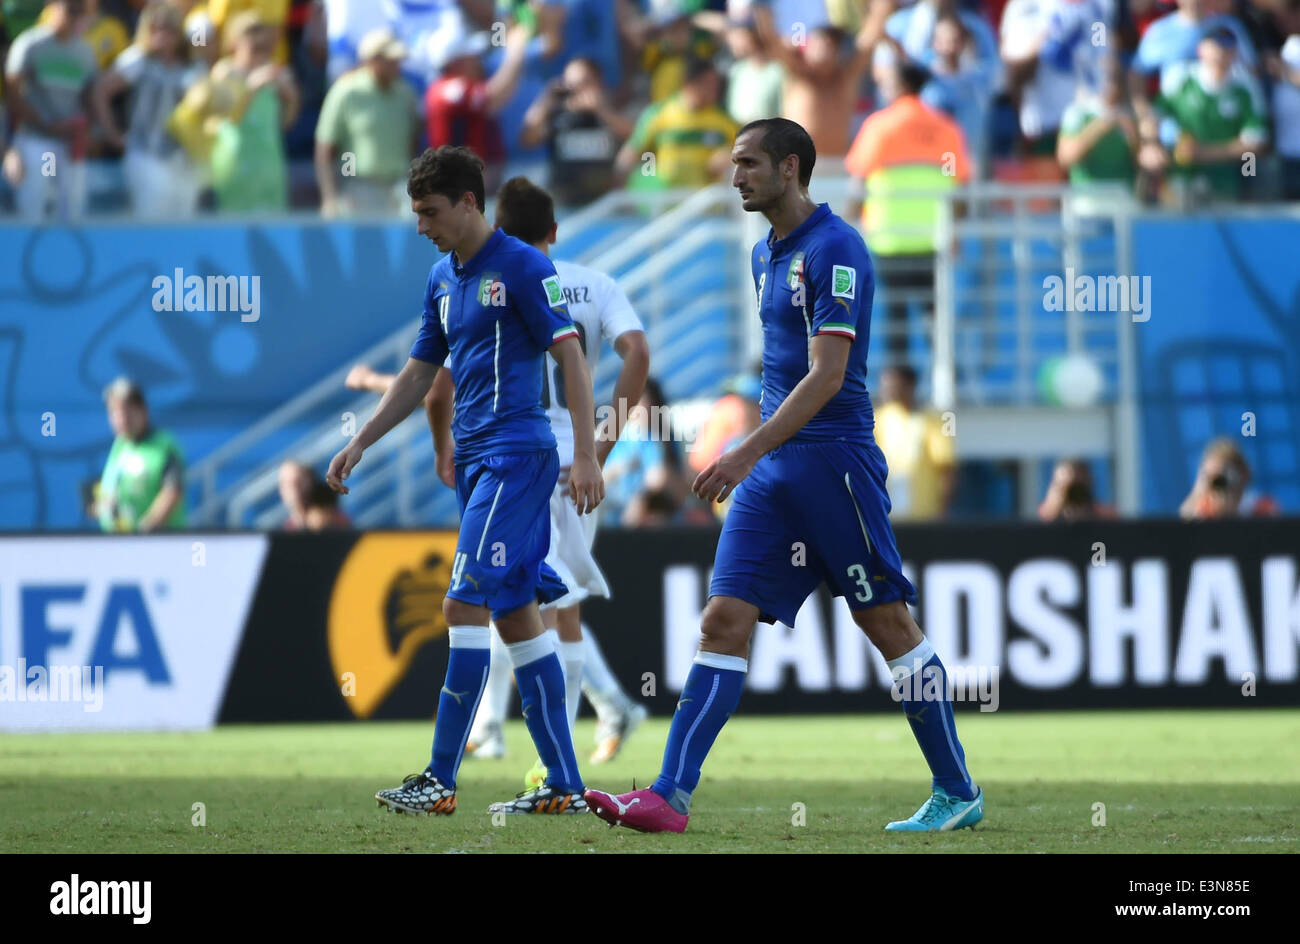 Natal, Brazil. 24th June, 2014. Italy's Giorgio Chiellini (R) leaves the field after a Group D match between Italy and Uruguay of 2014 FIFA World Cup at the Estadio das Dunas Stadium in Natal, Brazil, June 24, 2014. Uruguay won 1-0 over Italy on Tuesday. © Guo Yong/Xinhua/Alamy Live News Stock Photo